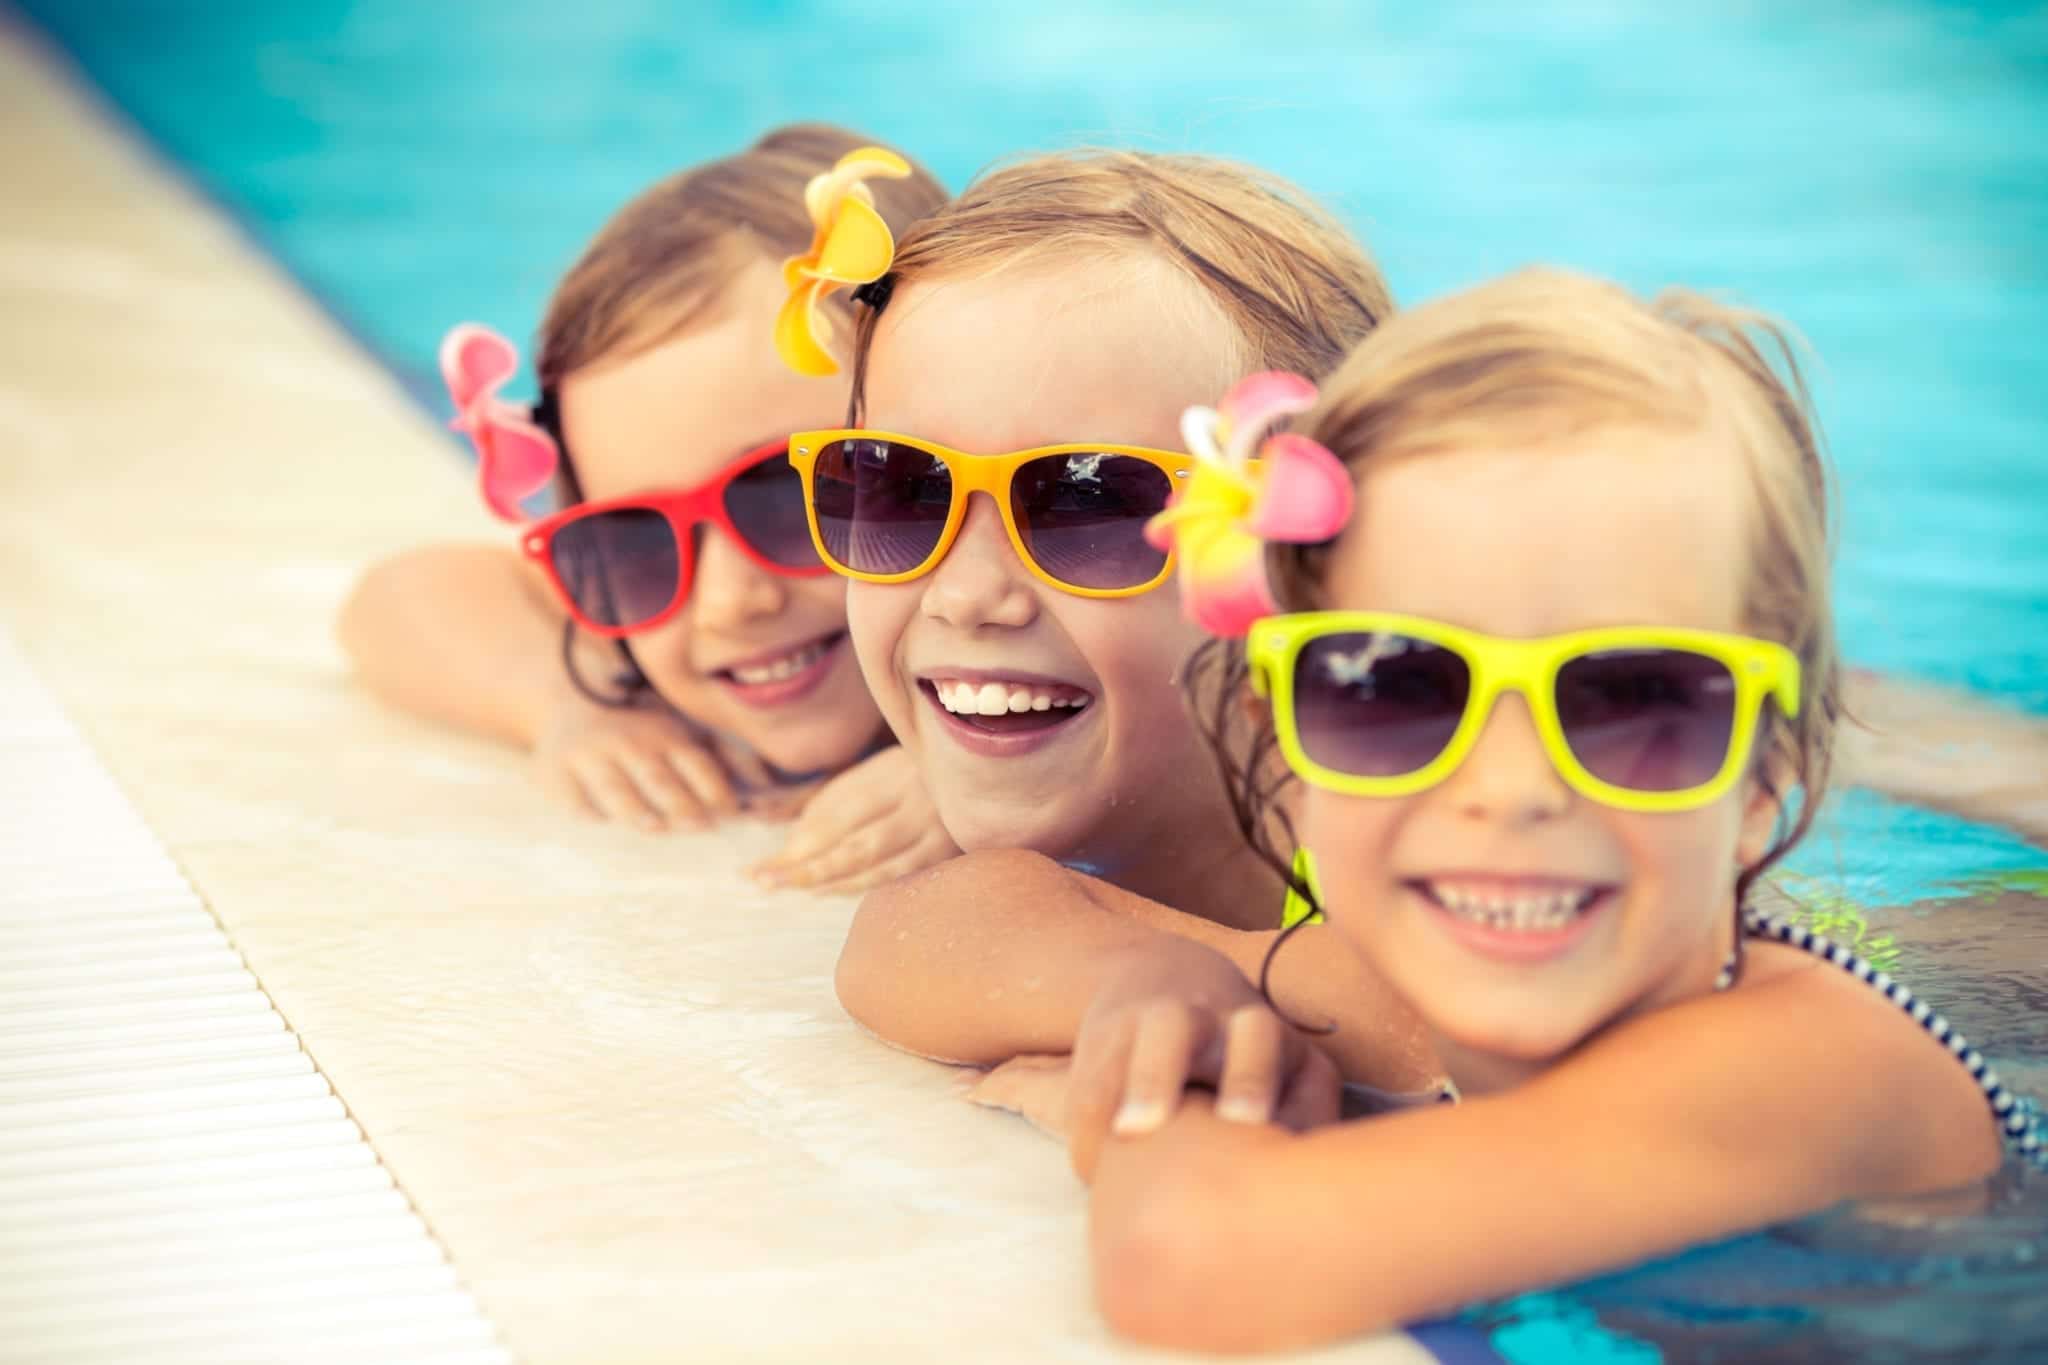 6 Common Summer Injuries for Florida Kids